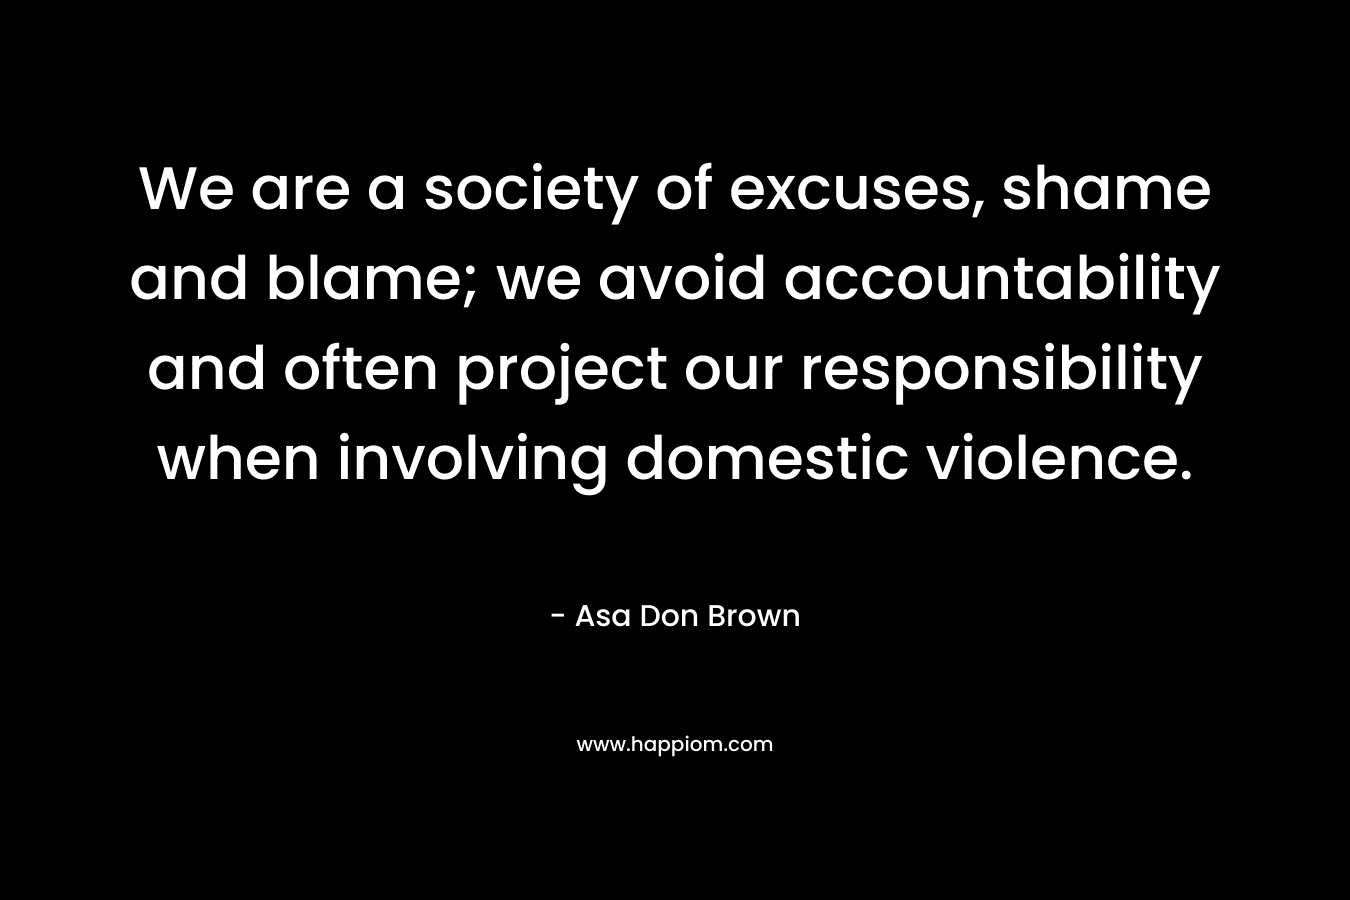 We are a society of excuses, shame and blame; we avoid accountability and often project our responsibility when involving domestic violence.